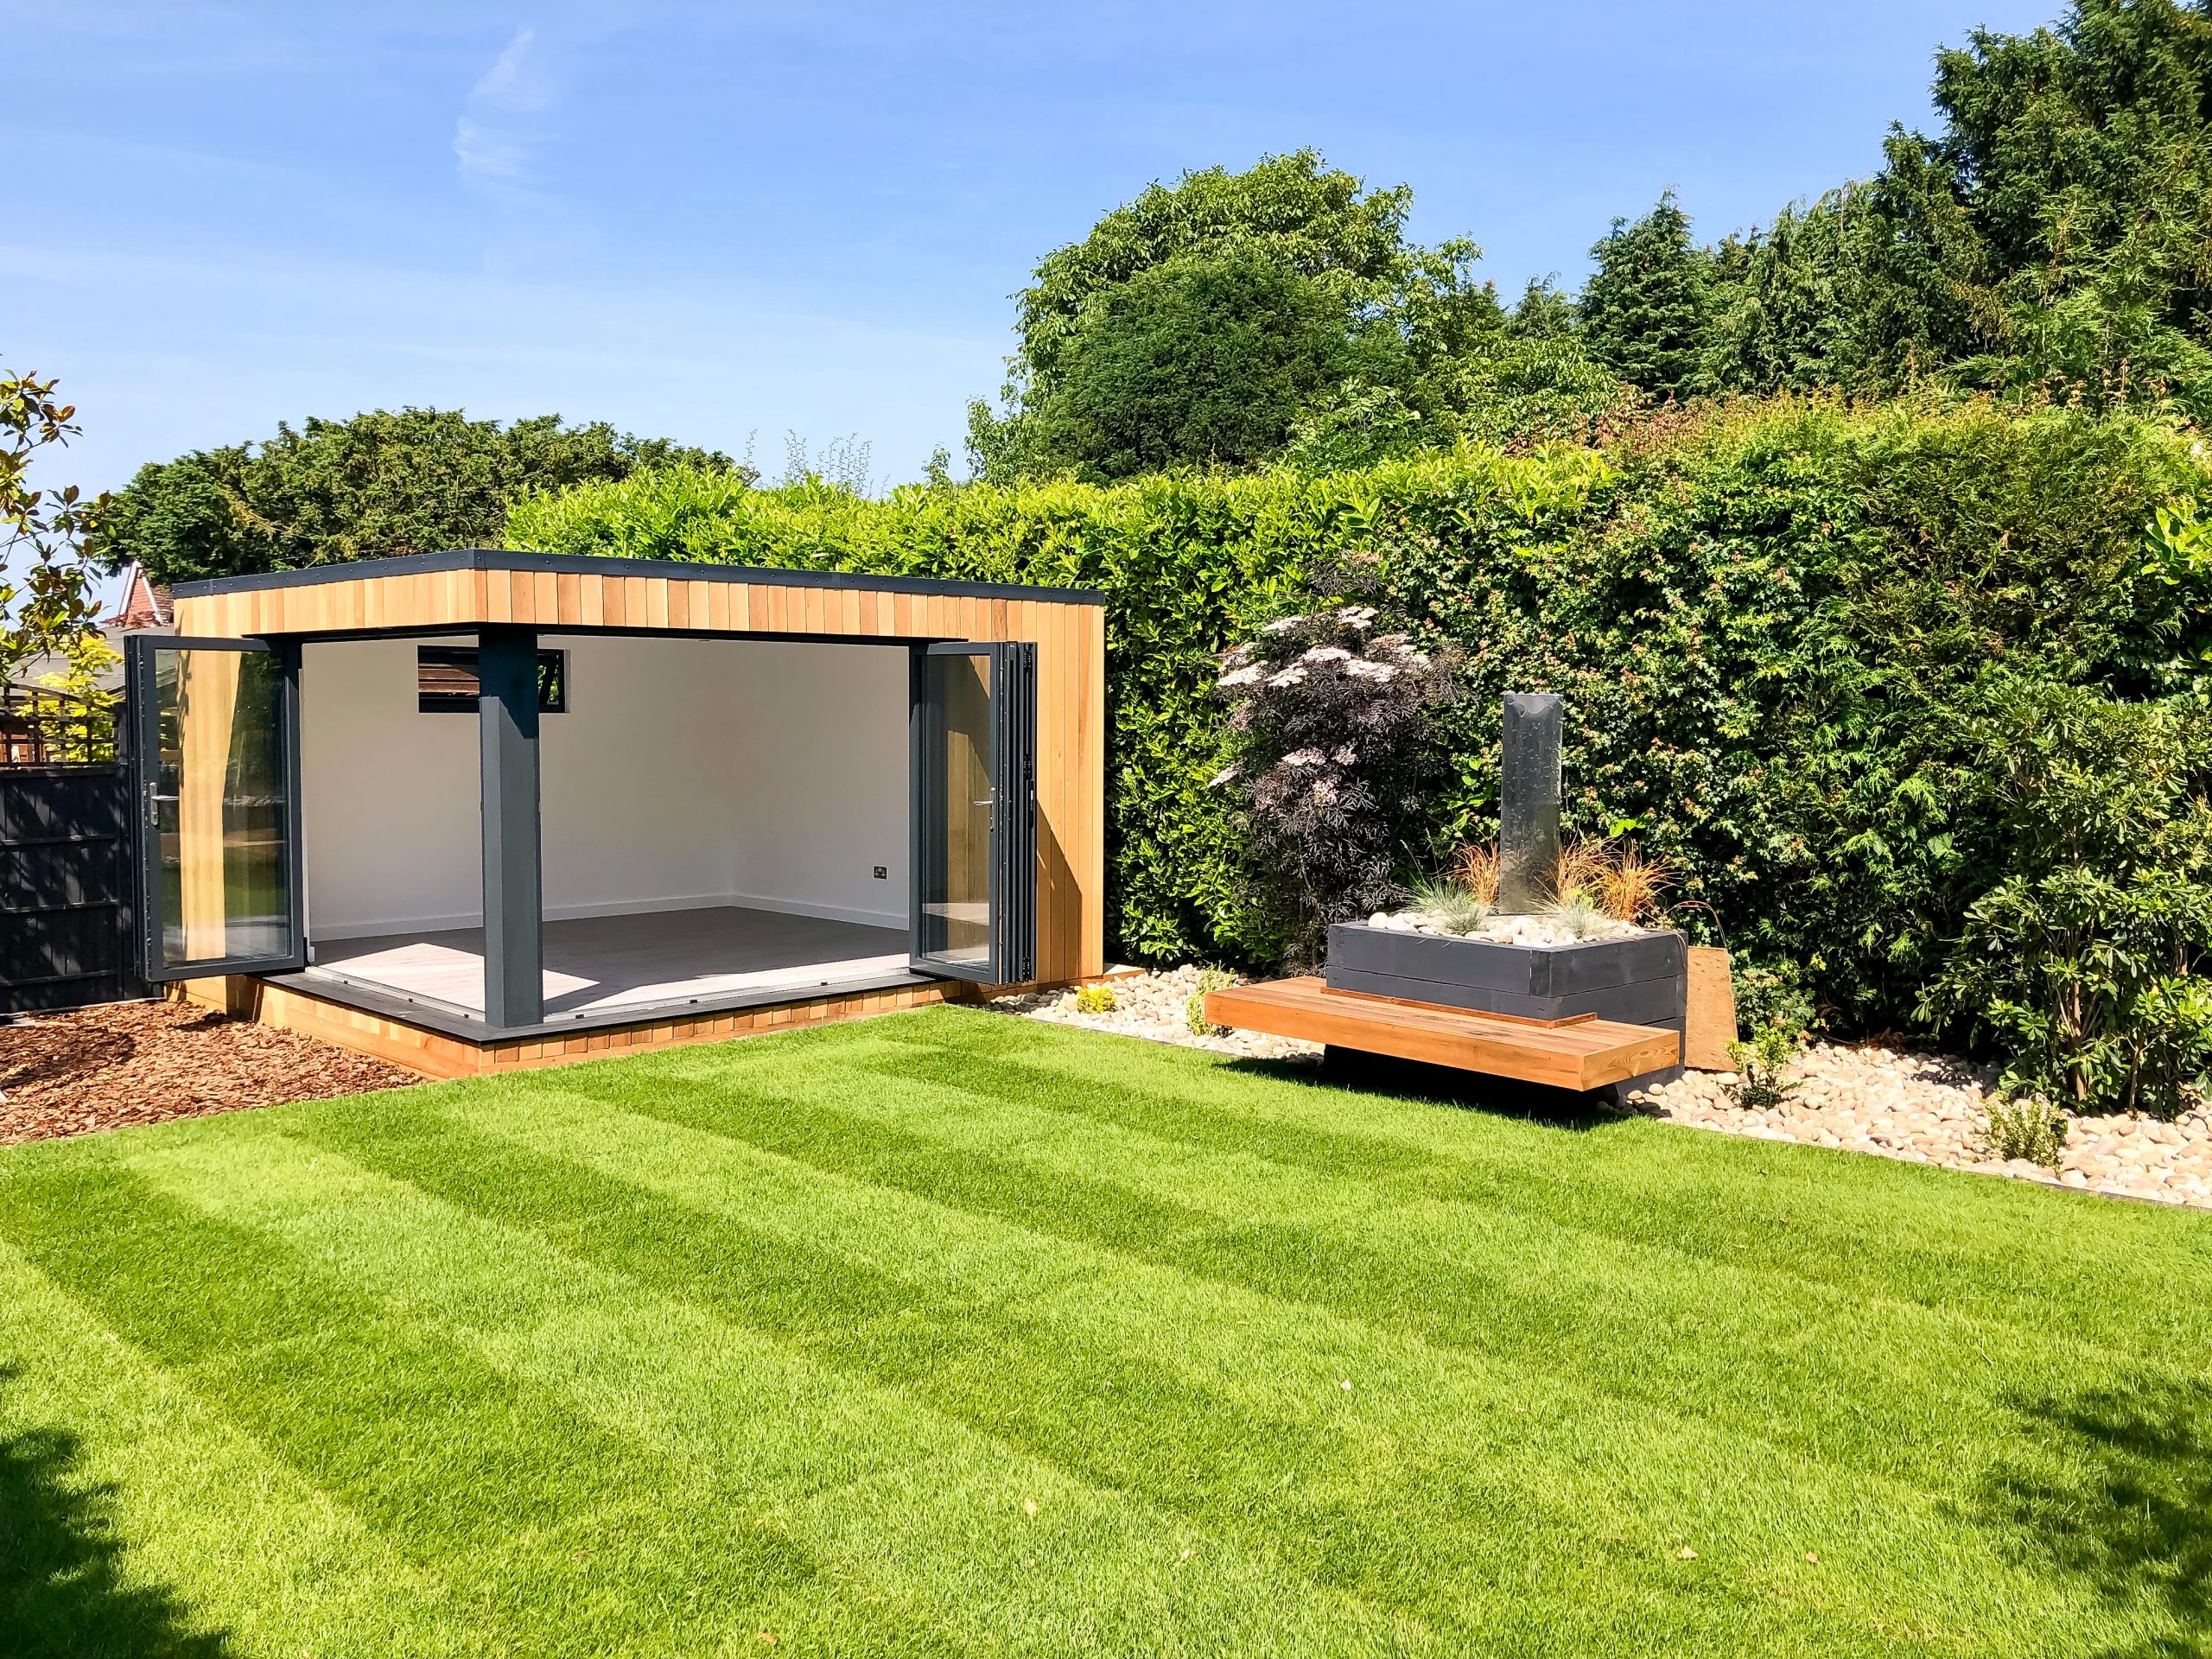 Exterior day view of a small Vivid Green garden office with open anthreacite grey aluminium bi-fold doors, surrounded by tall hedges and grass, with a wooden bench to the right